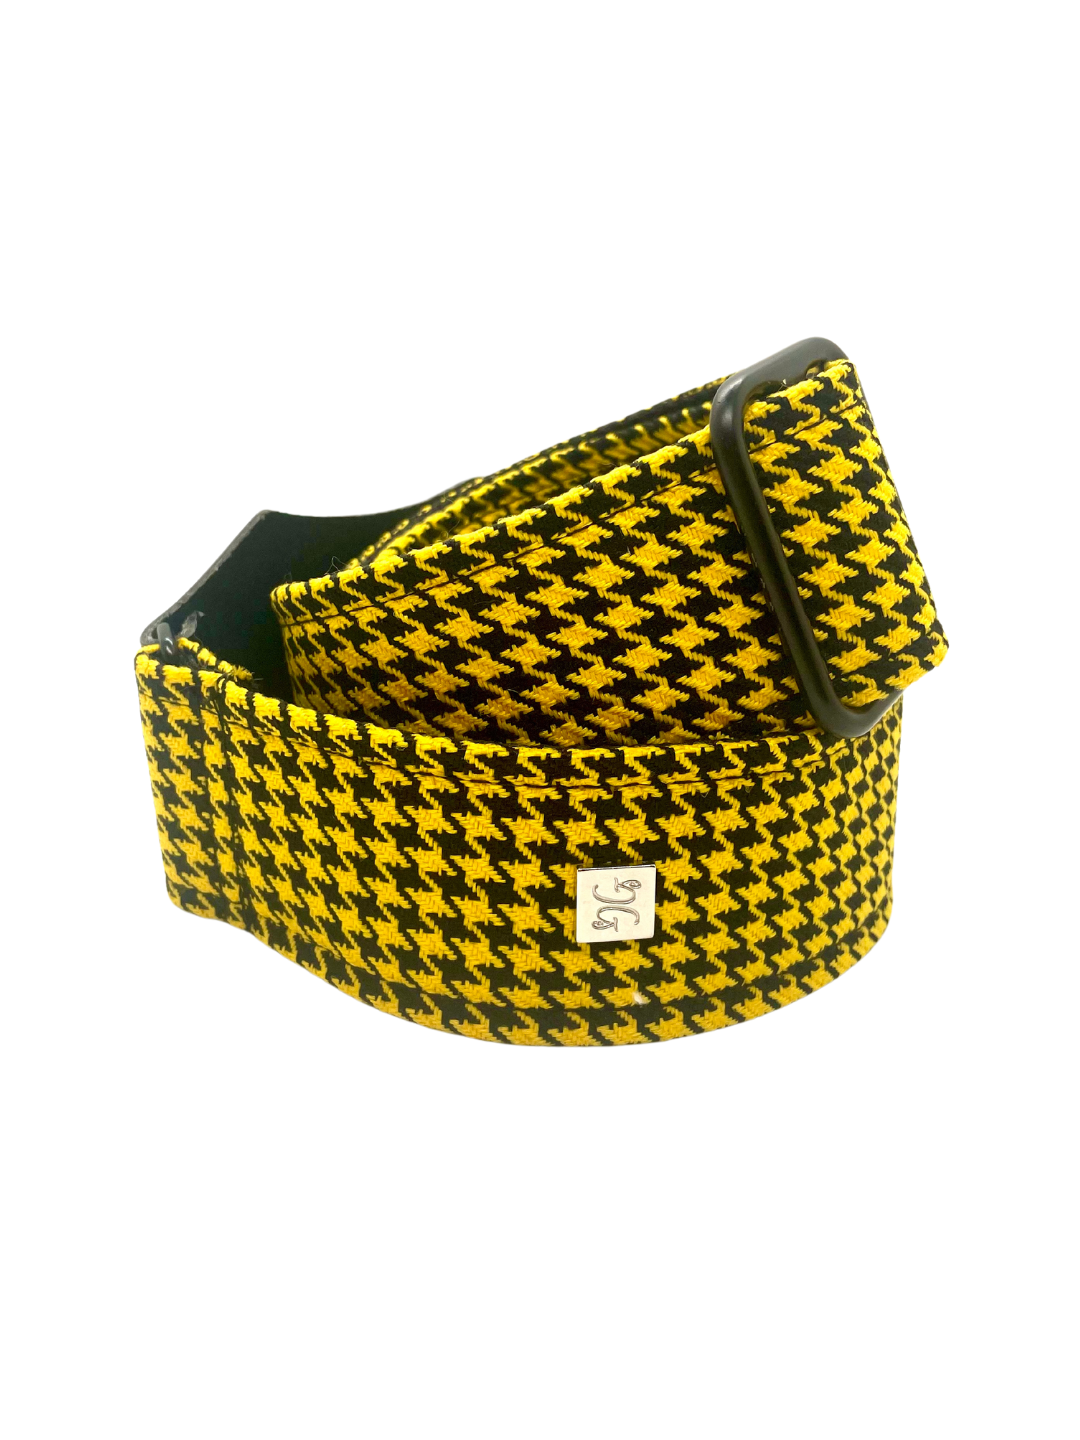 FLY Hounds Tooth 2” Guitar Straps